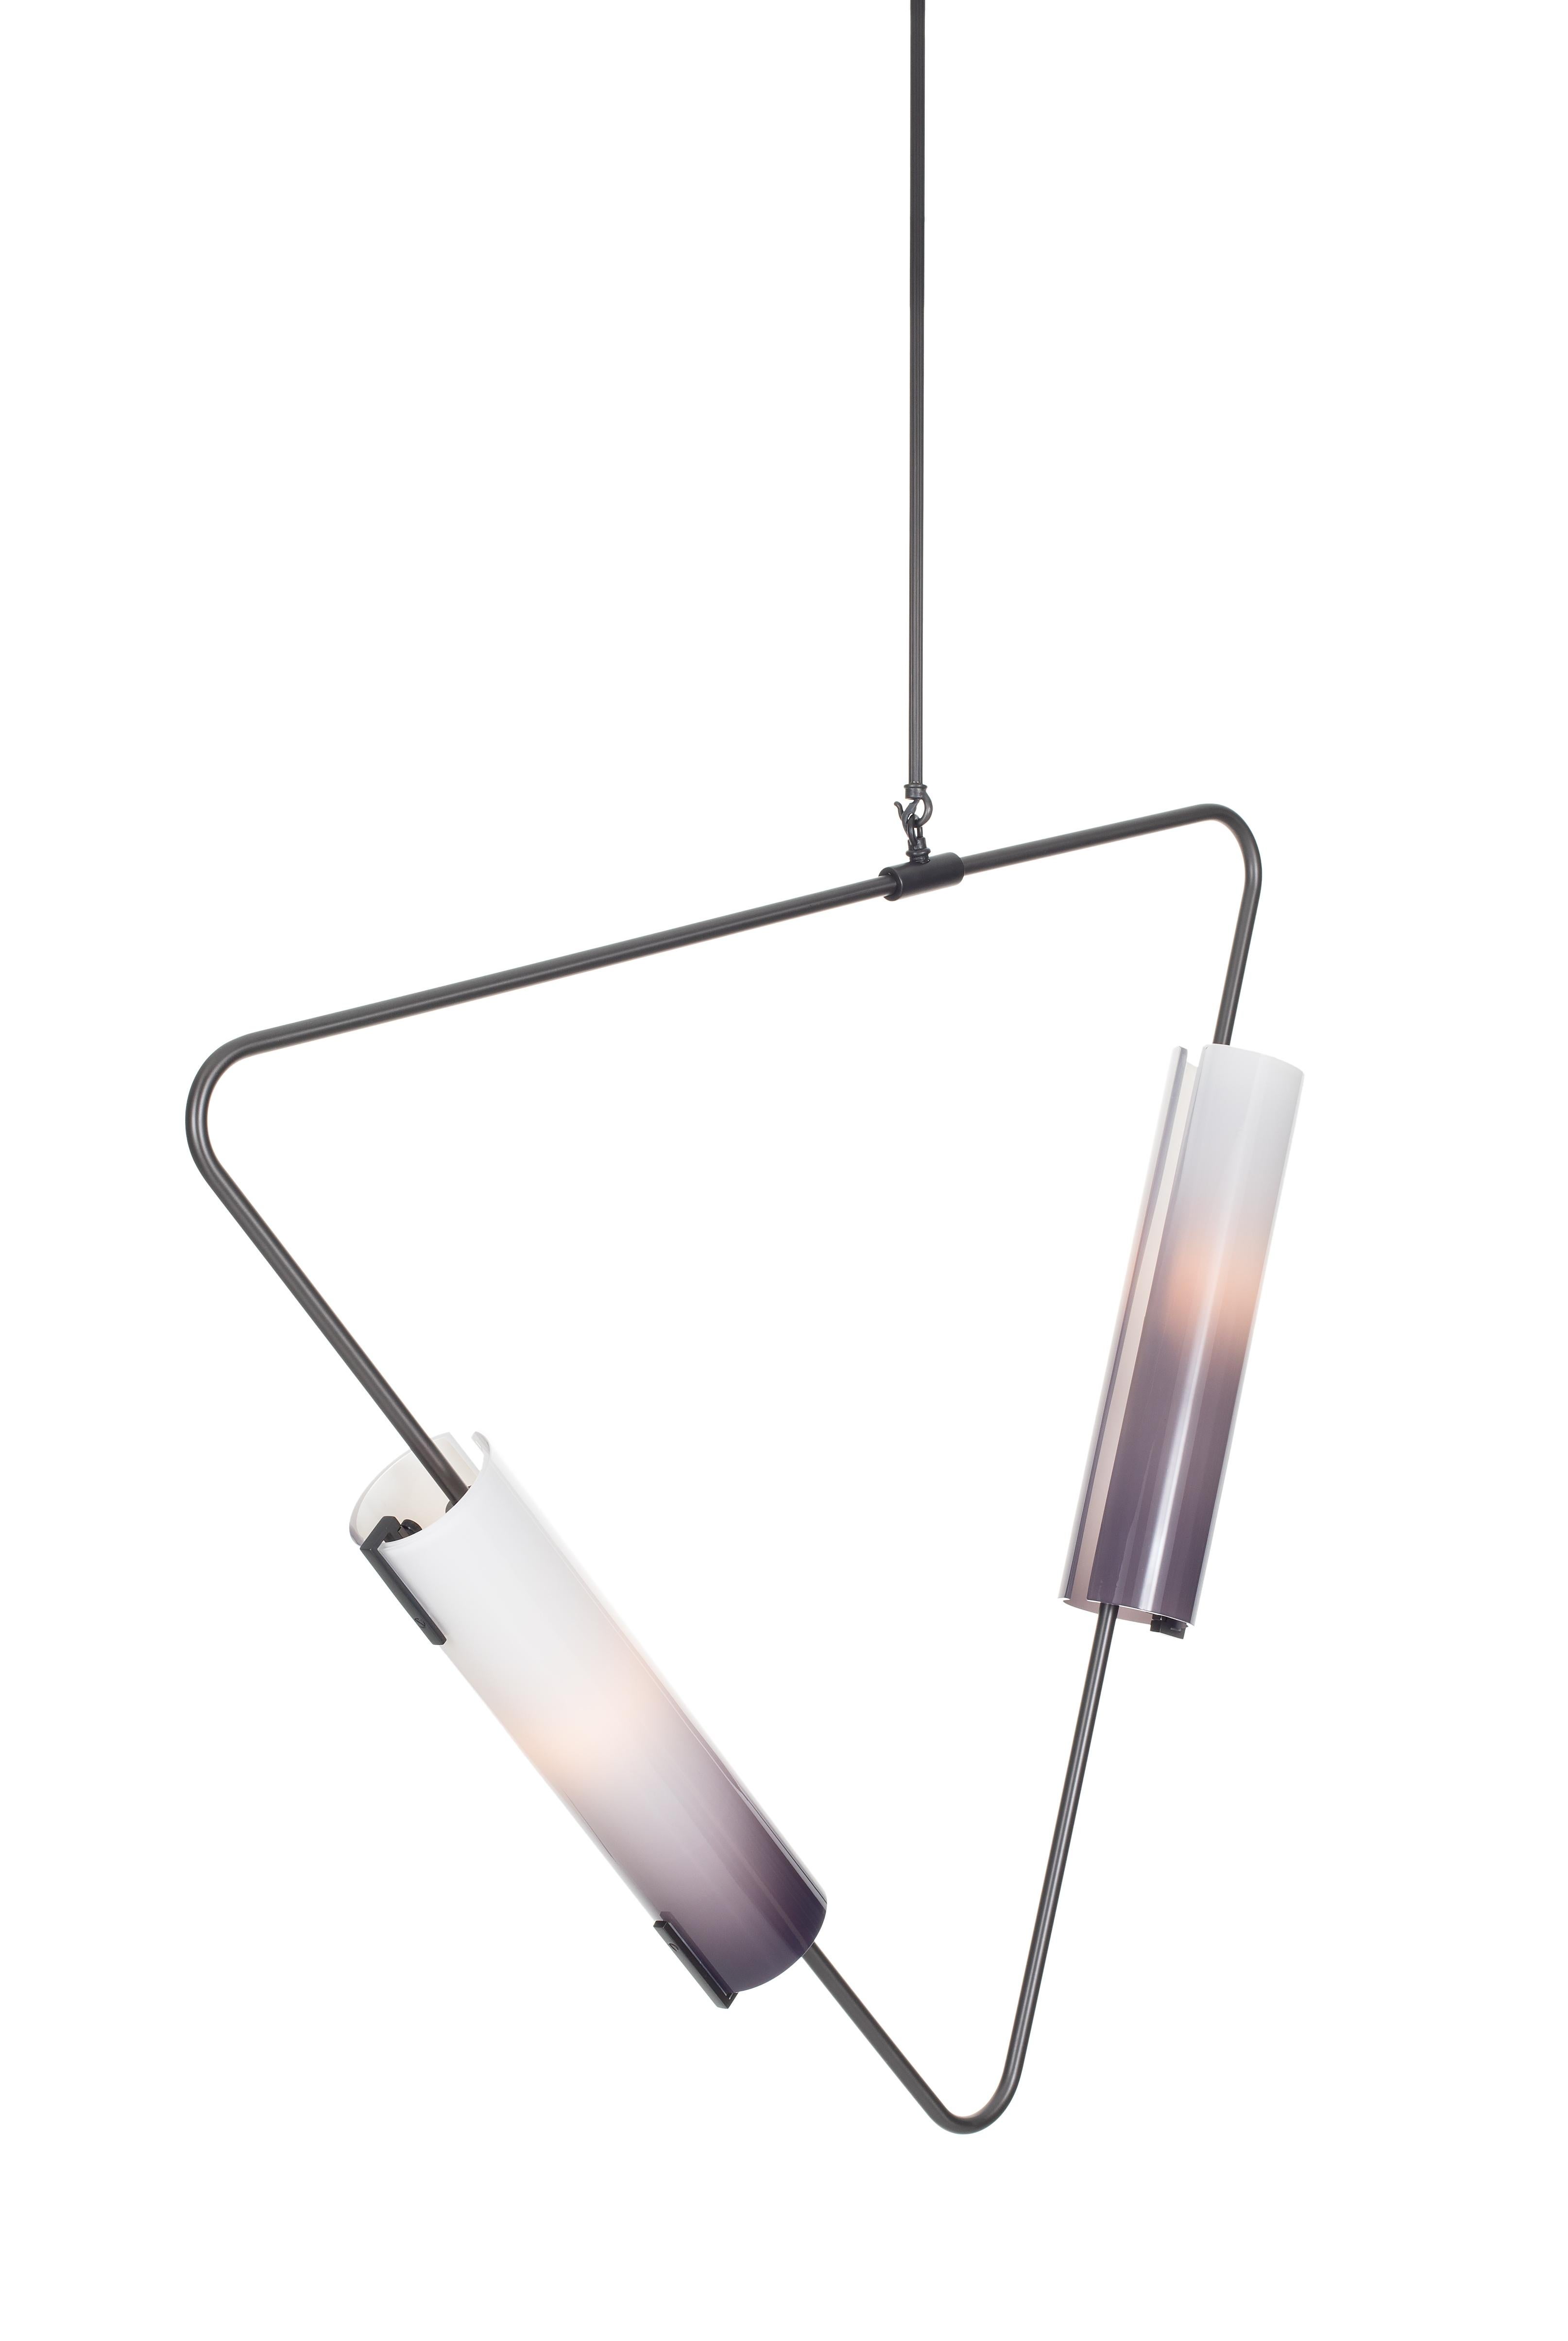 Muse Pendant by Avram Rusu Studio in Brushed Brass with Mocha Shades In New Condition For Sale In Brooklyn, NY